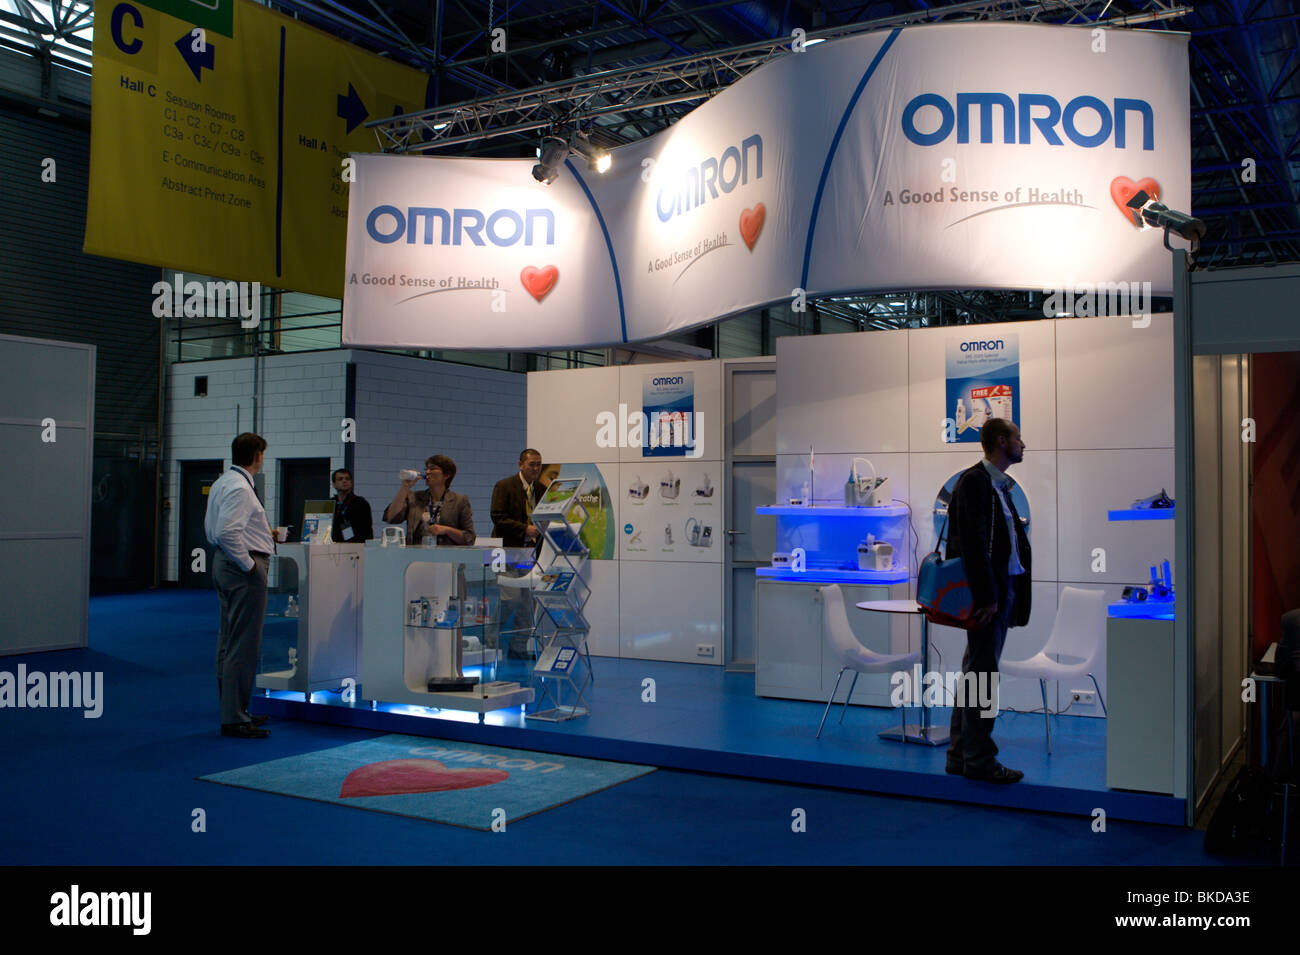 omron stand Stock Photo